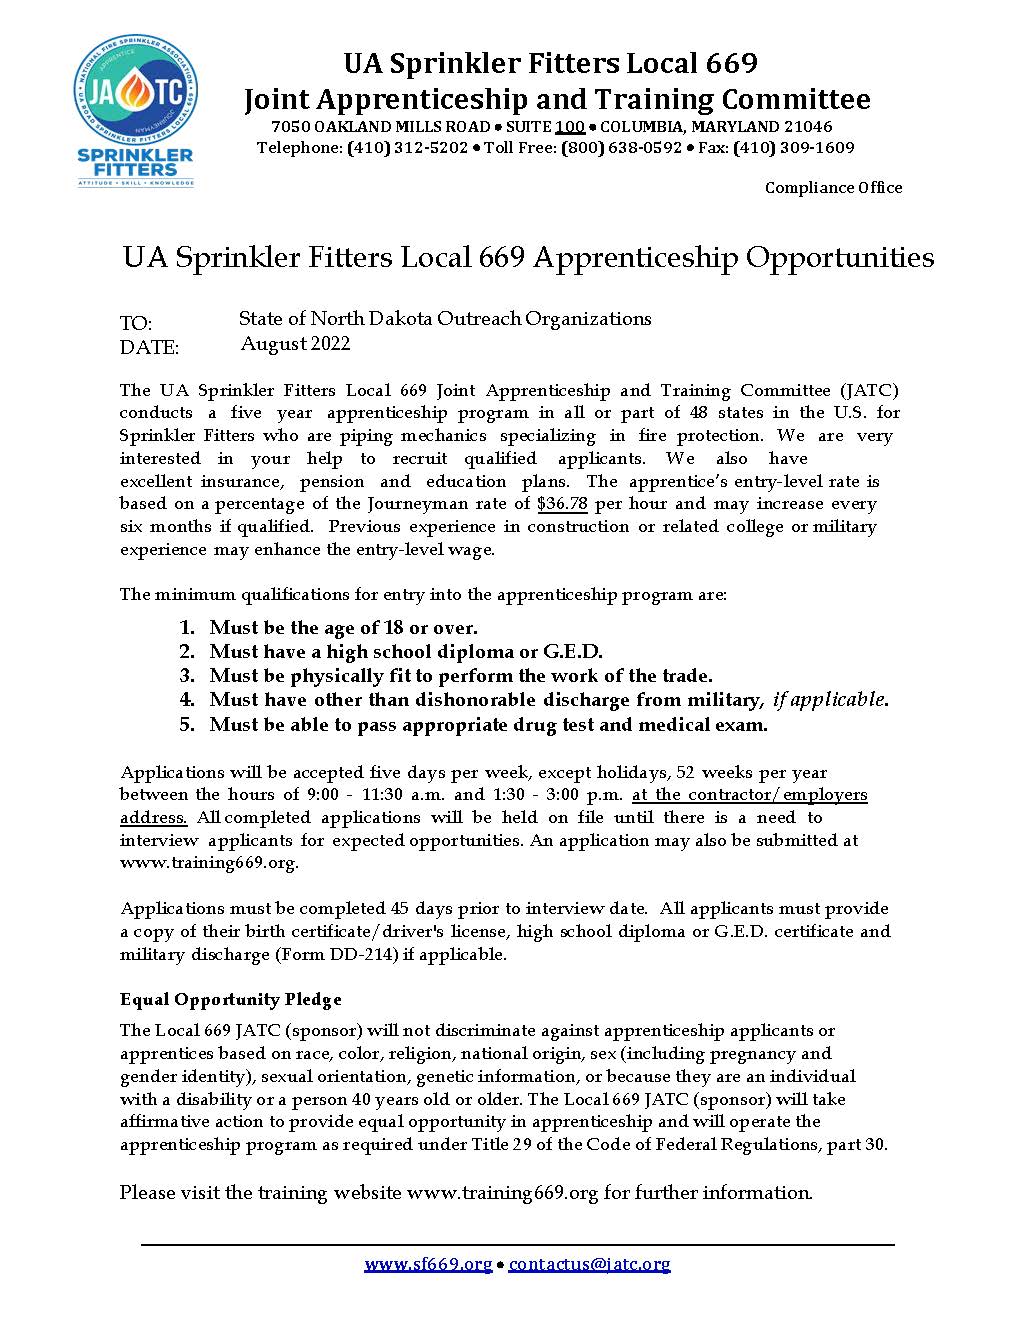 details on UA Sprinkler Fitters Local 669 apprenticeship opportunities